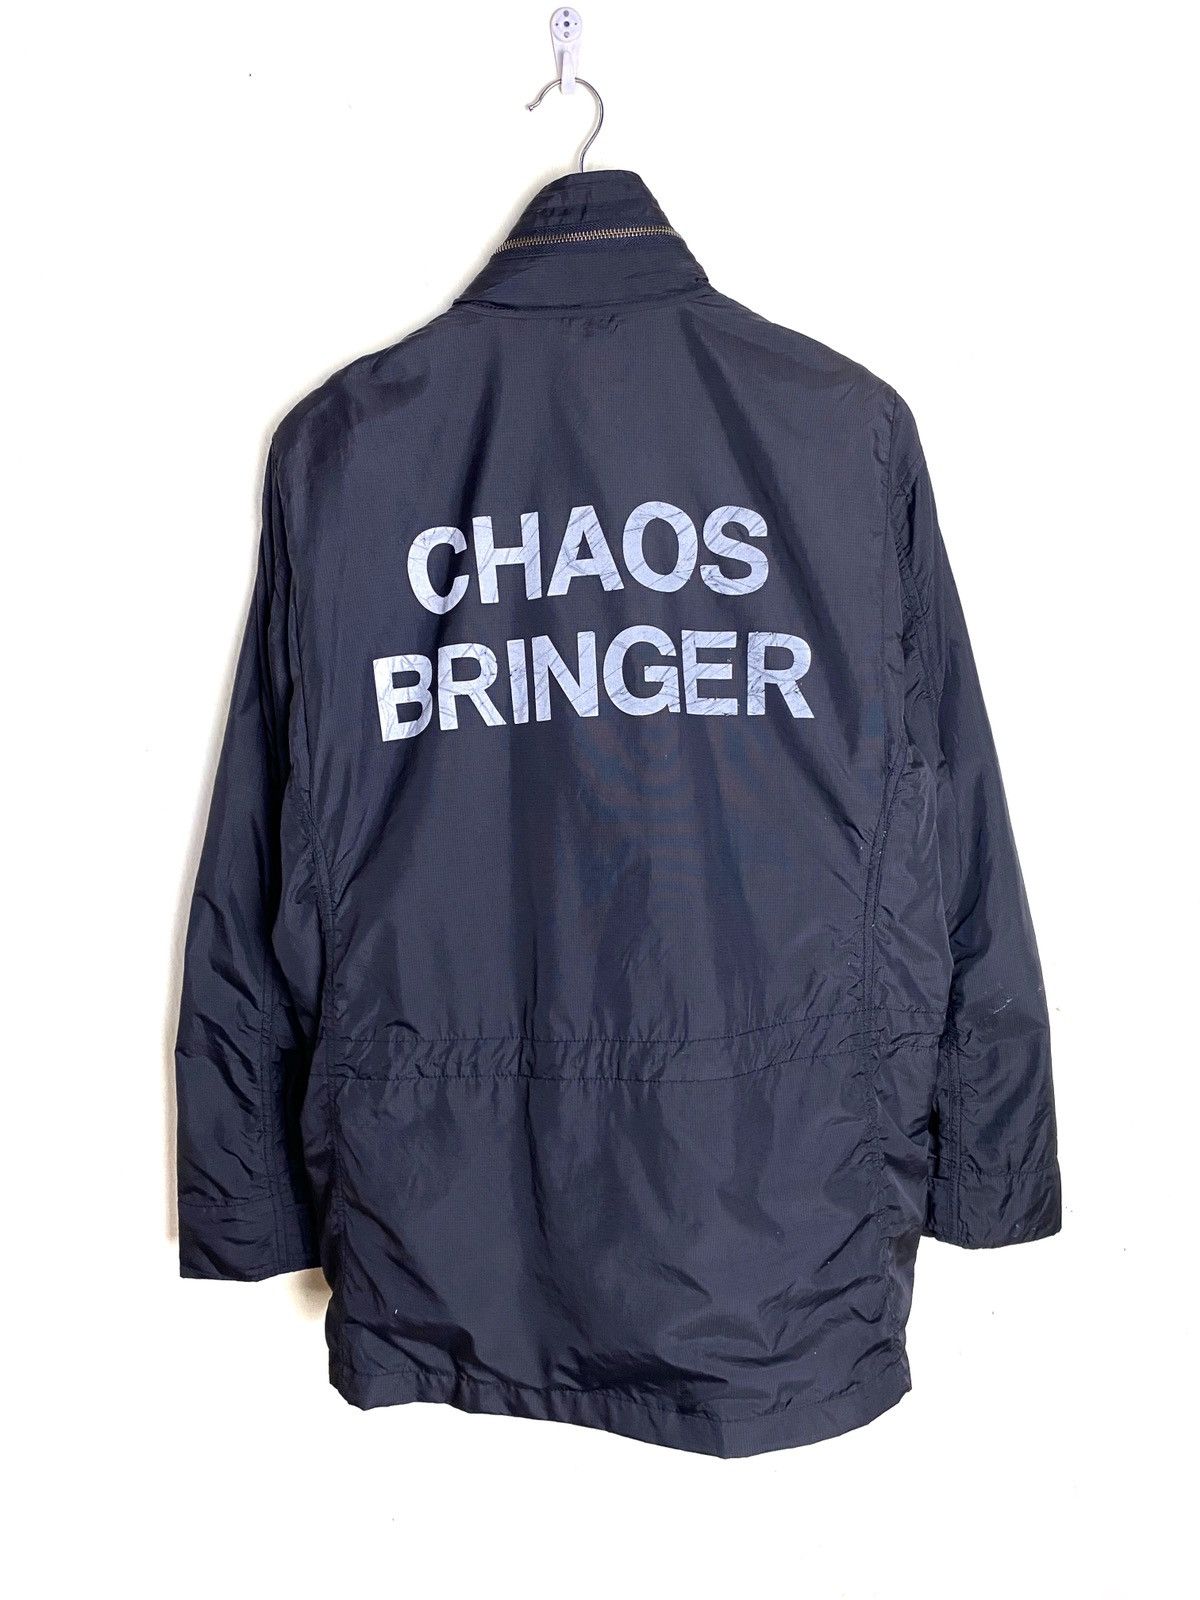 Hysteric Glamour Chaos Bringer M-65 Jacket - 5